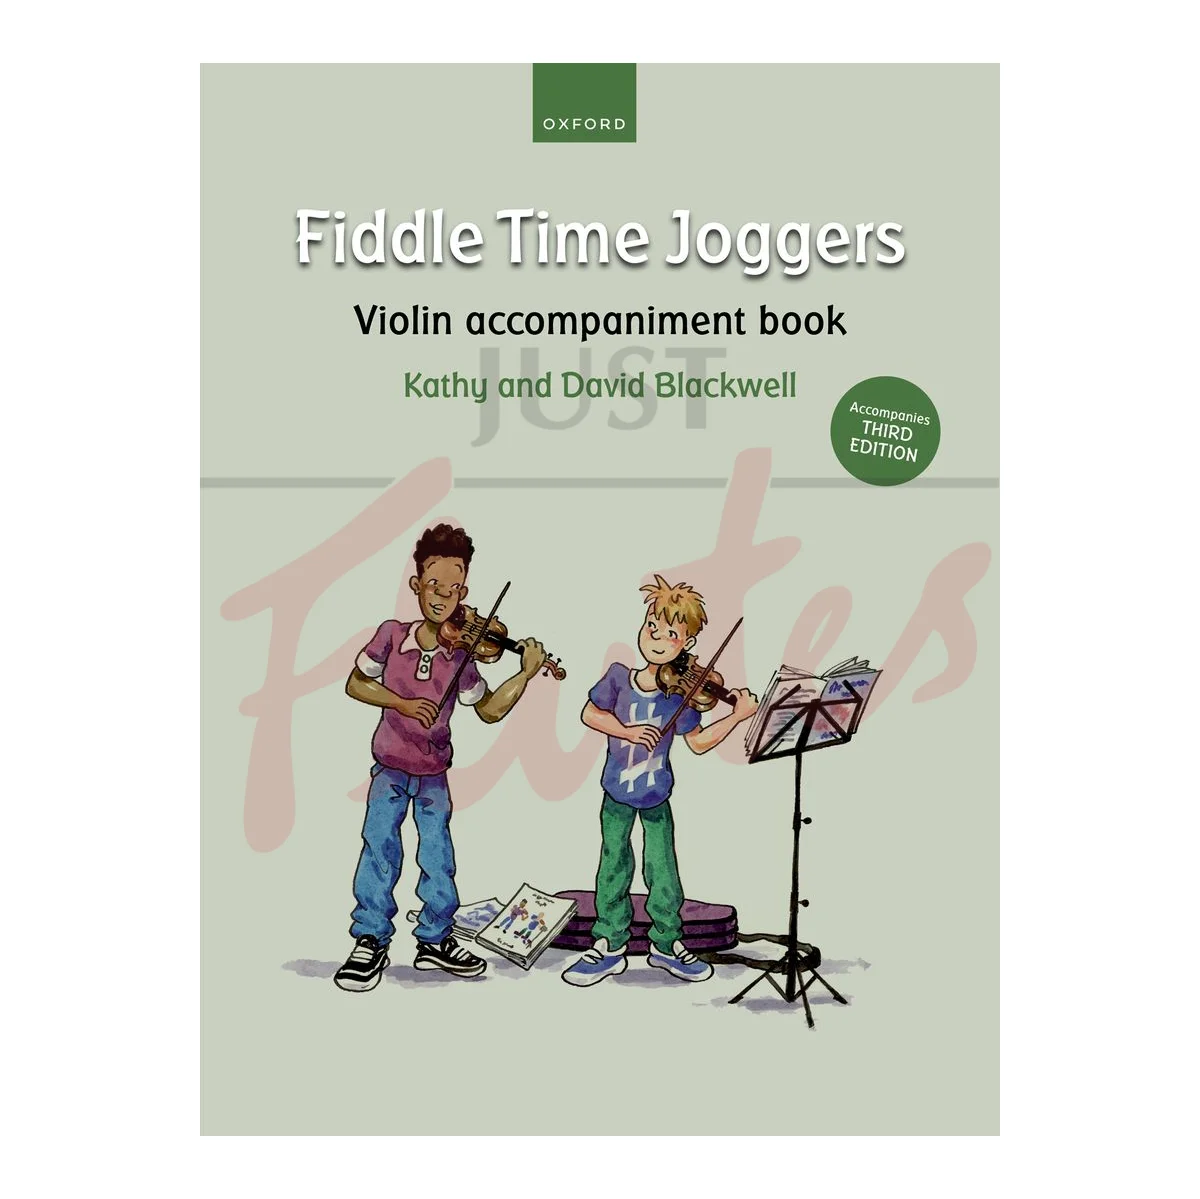 Fiddle Time Joggers - Violin Accompaniment Book for Third Edition